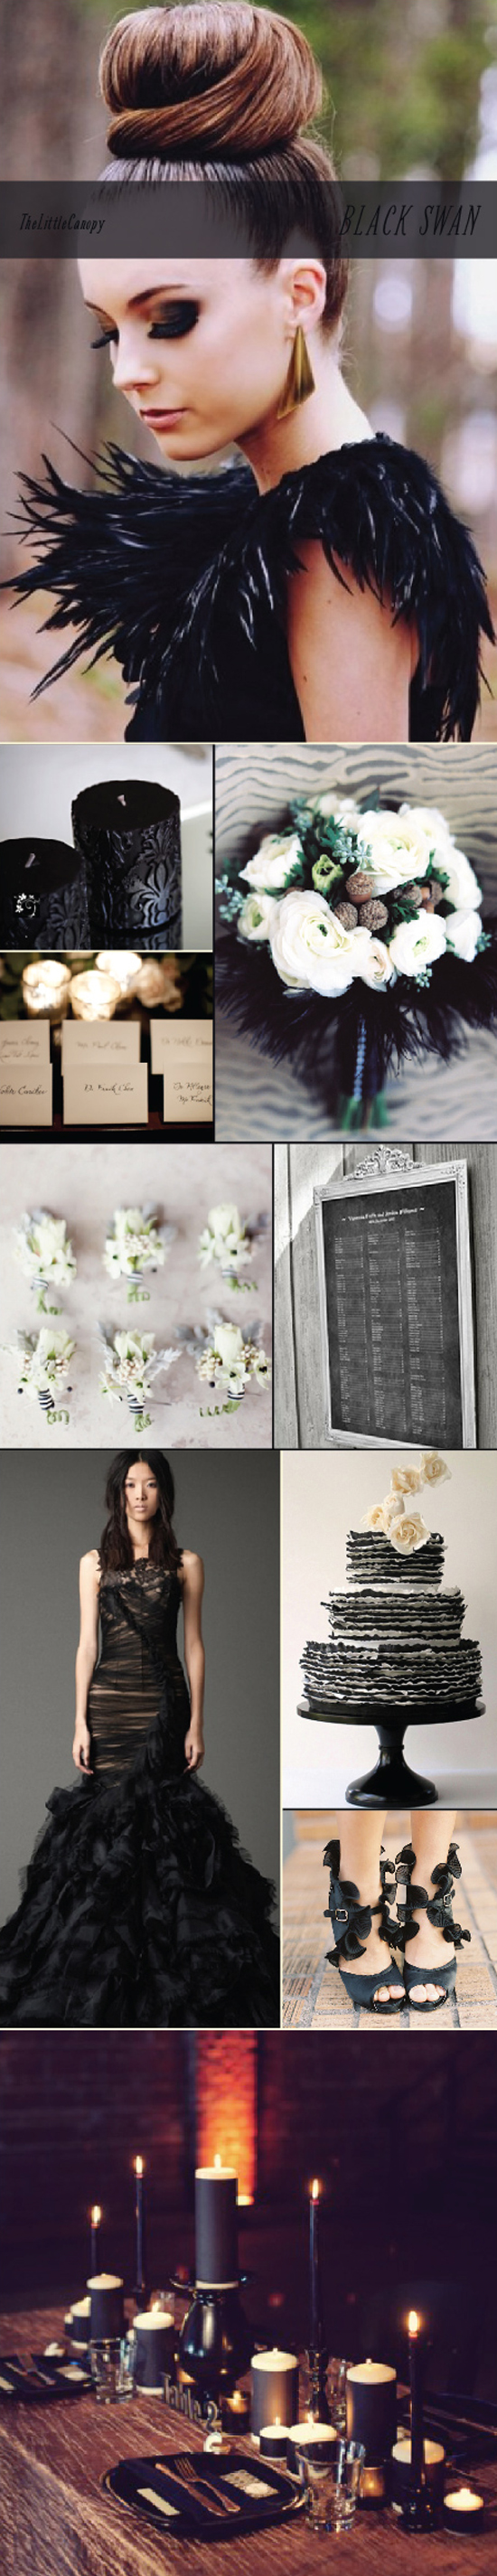 This week's inspiration board: Black Swan. Not only does this theme push the boundaries of the typical wedding colors but also adds a very romantic and theatrical feel! The Black Swan exudes confidence while staying composed and elegant. Hope this theme board sparks your imagination! Enjoy!